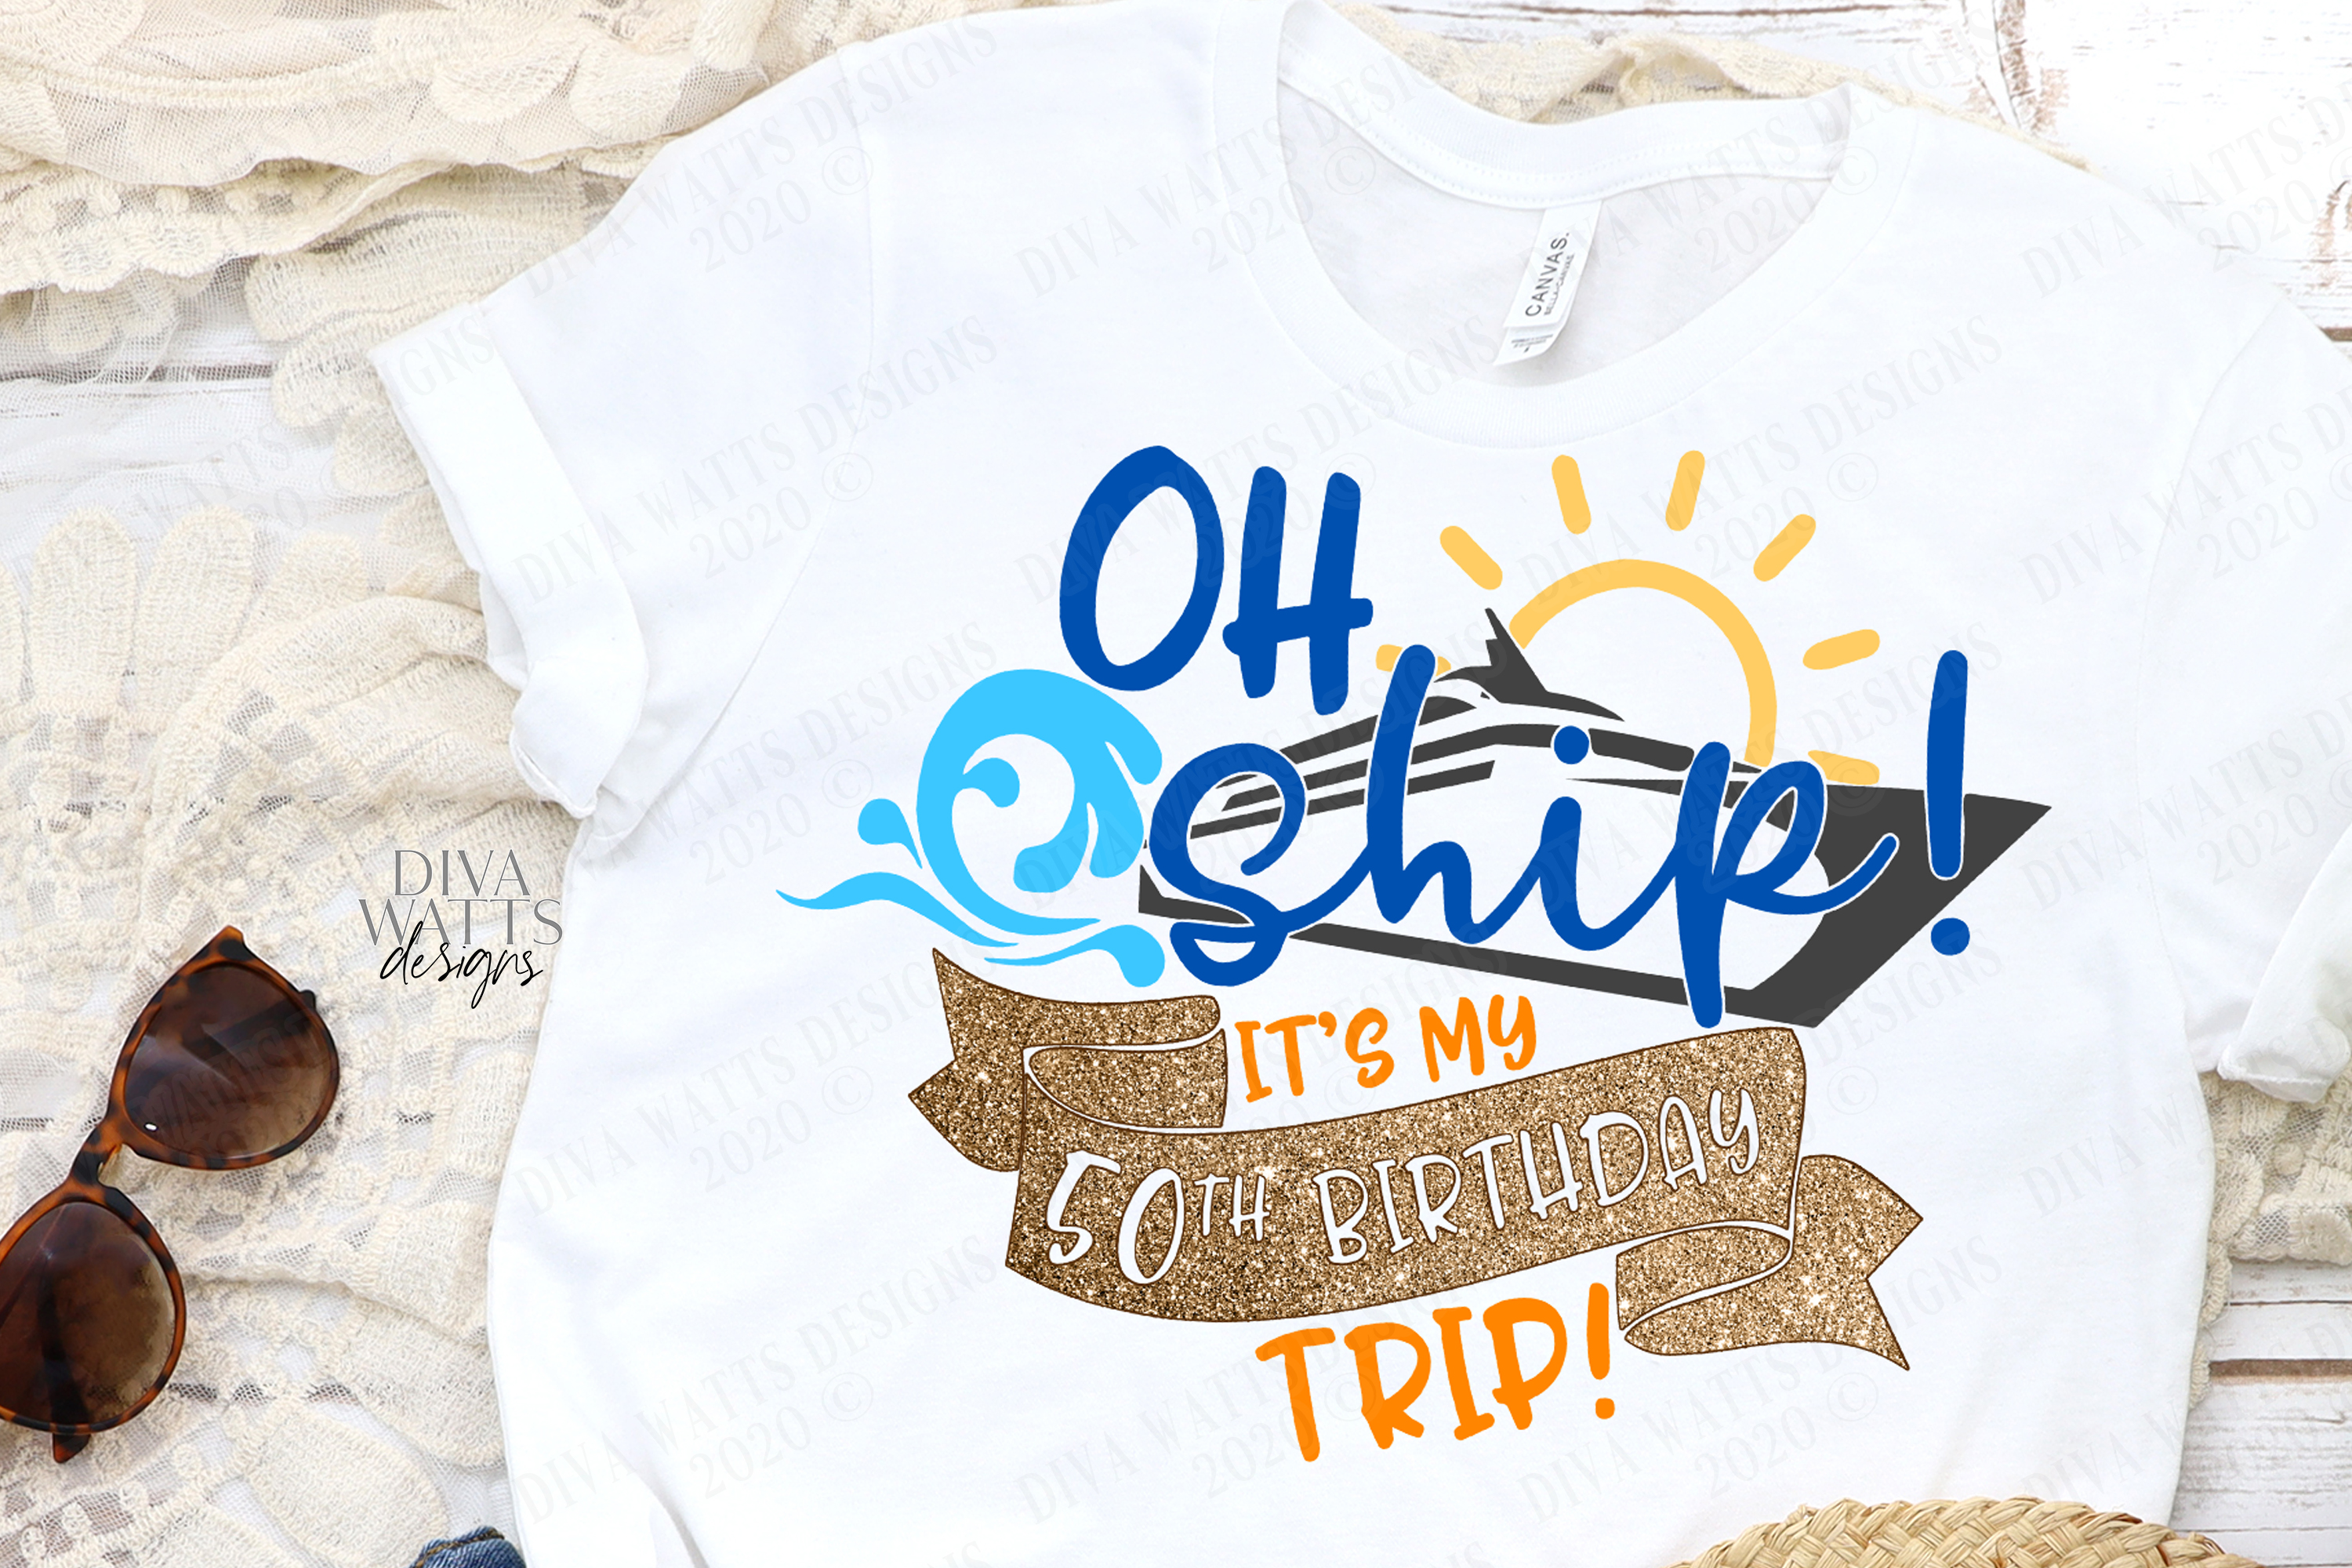 Download Oh Ship! It's a 50th Birthday Trip - Cruise Shirt SVG